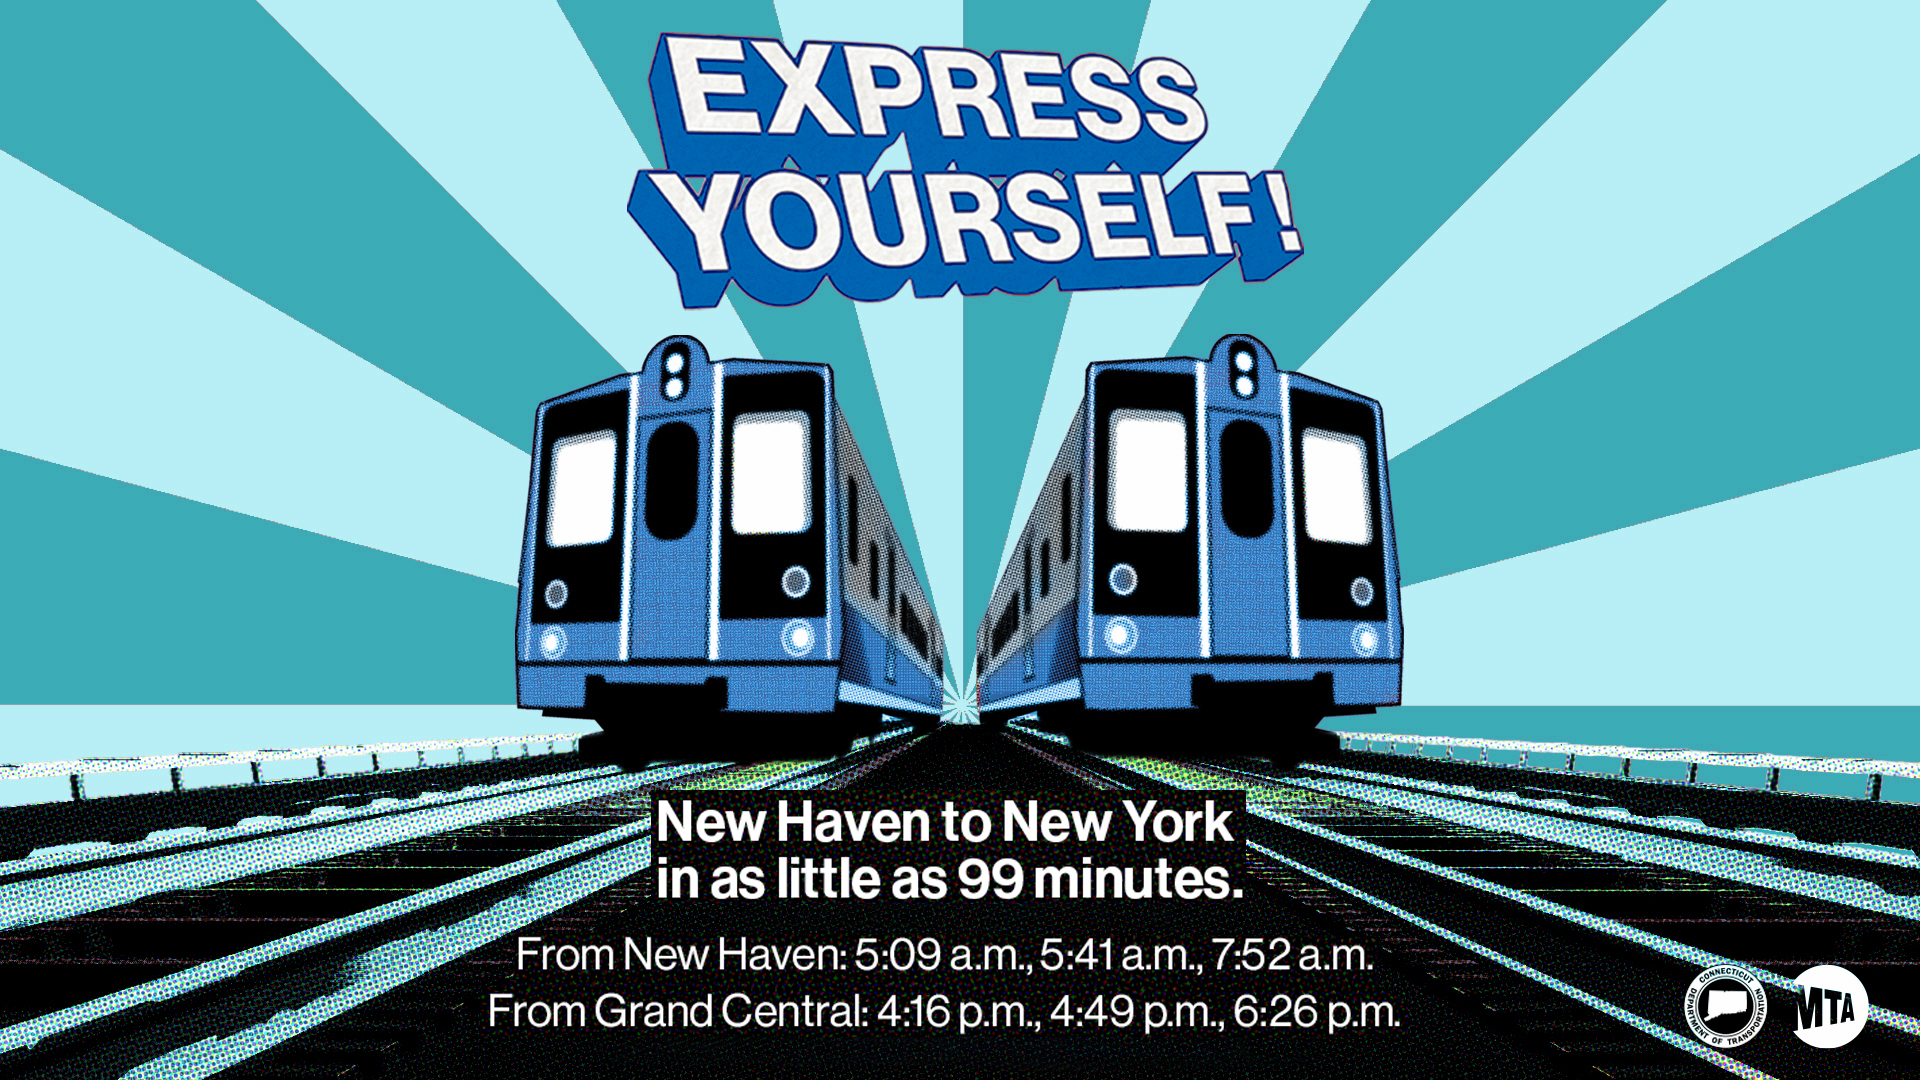 graphic informing people that they can travel from New Haven to New York in as little as 99 minutes.